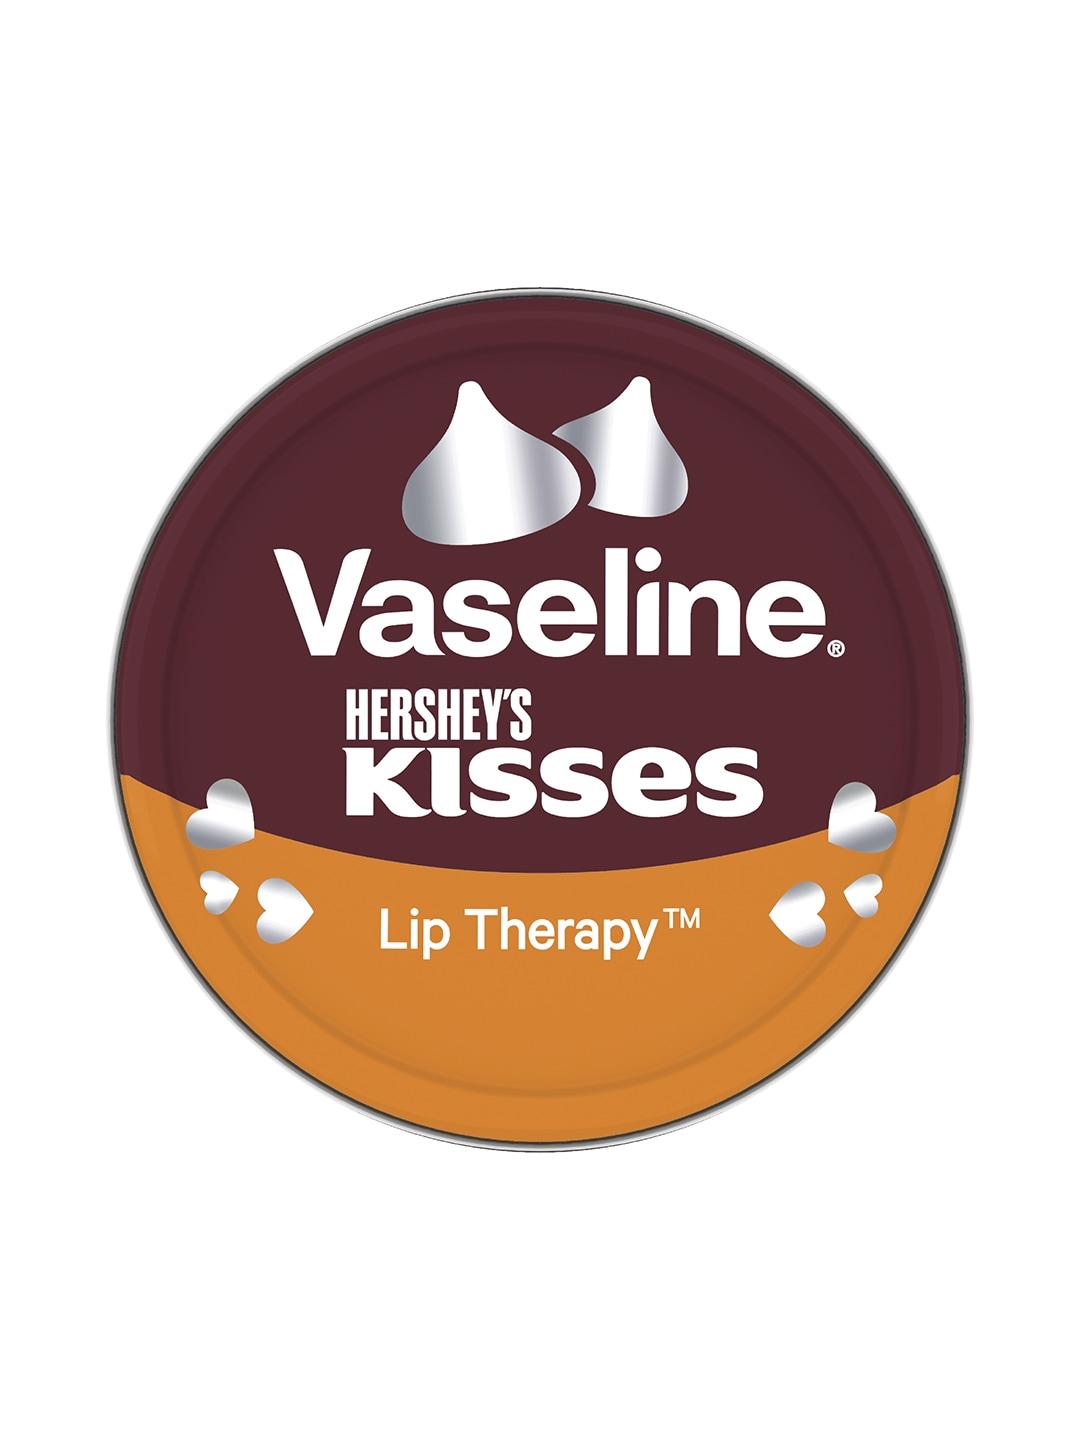 Vaseline Hershey's Kisses Lip Therapy Balm with Shea Butter - 17g